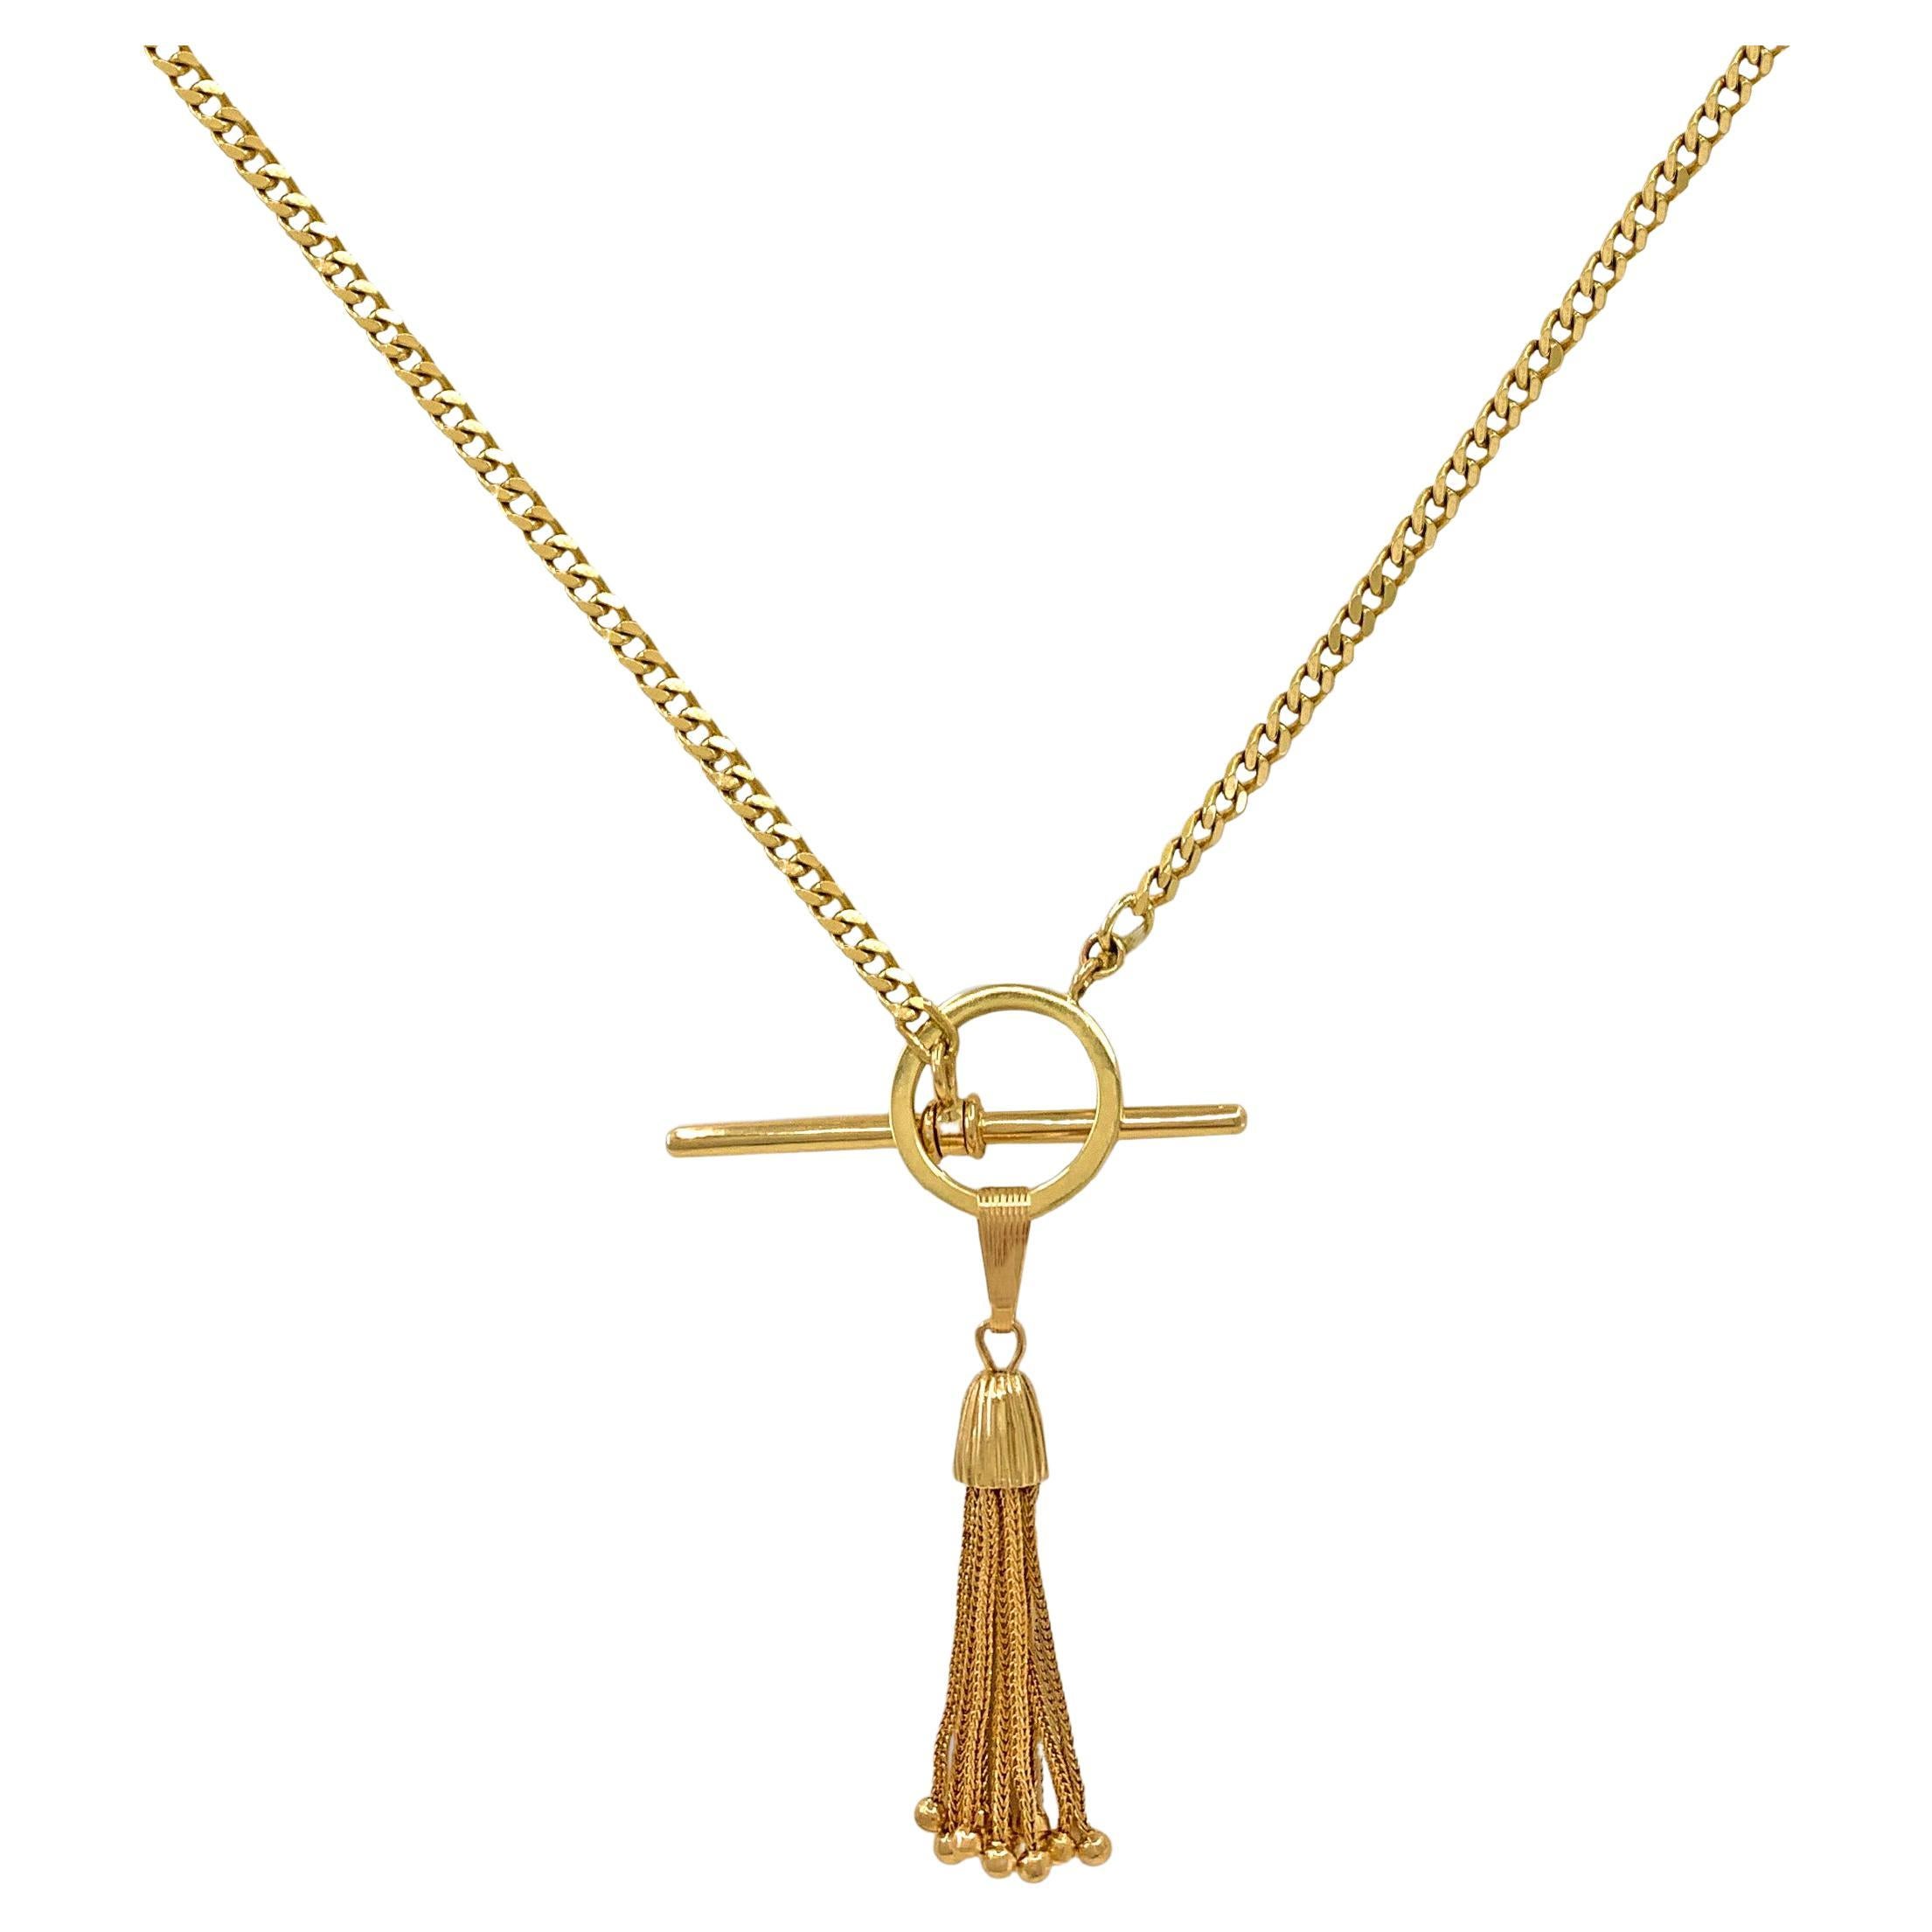 Princess Length Curb Chain with Toggle Closure & Tassel Ornament in Yellow Gold